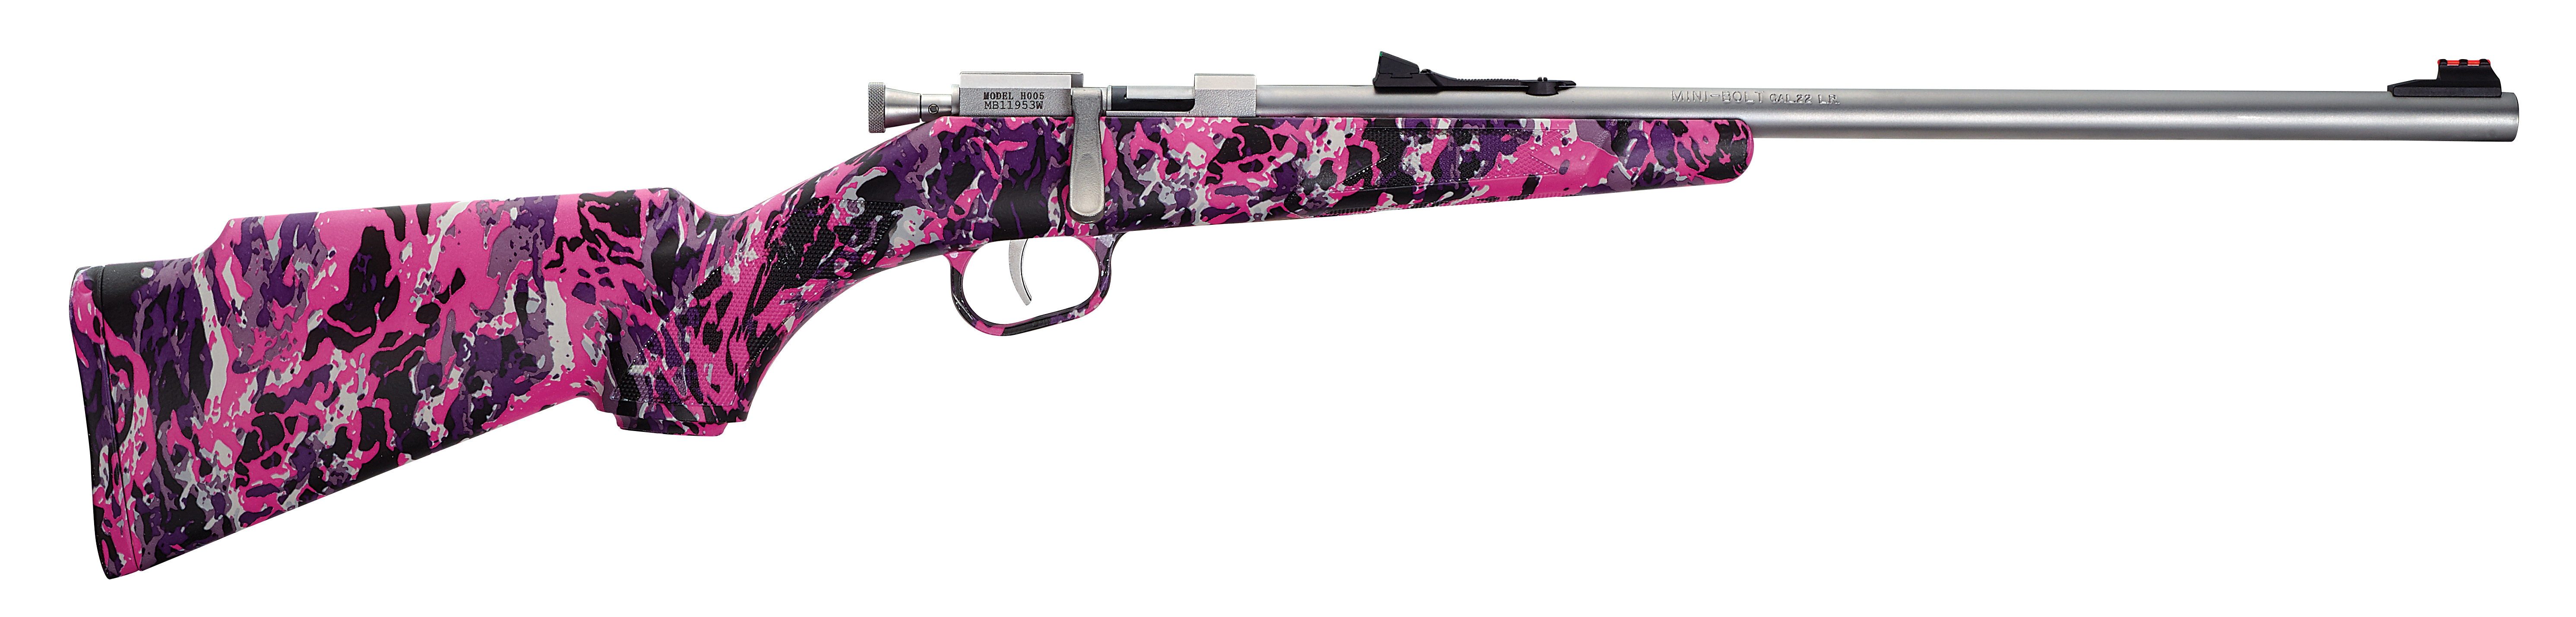 HENRY REPEATING ARMS MINI BOLT 22LR MUDDY GIRL-img-1